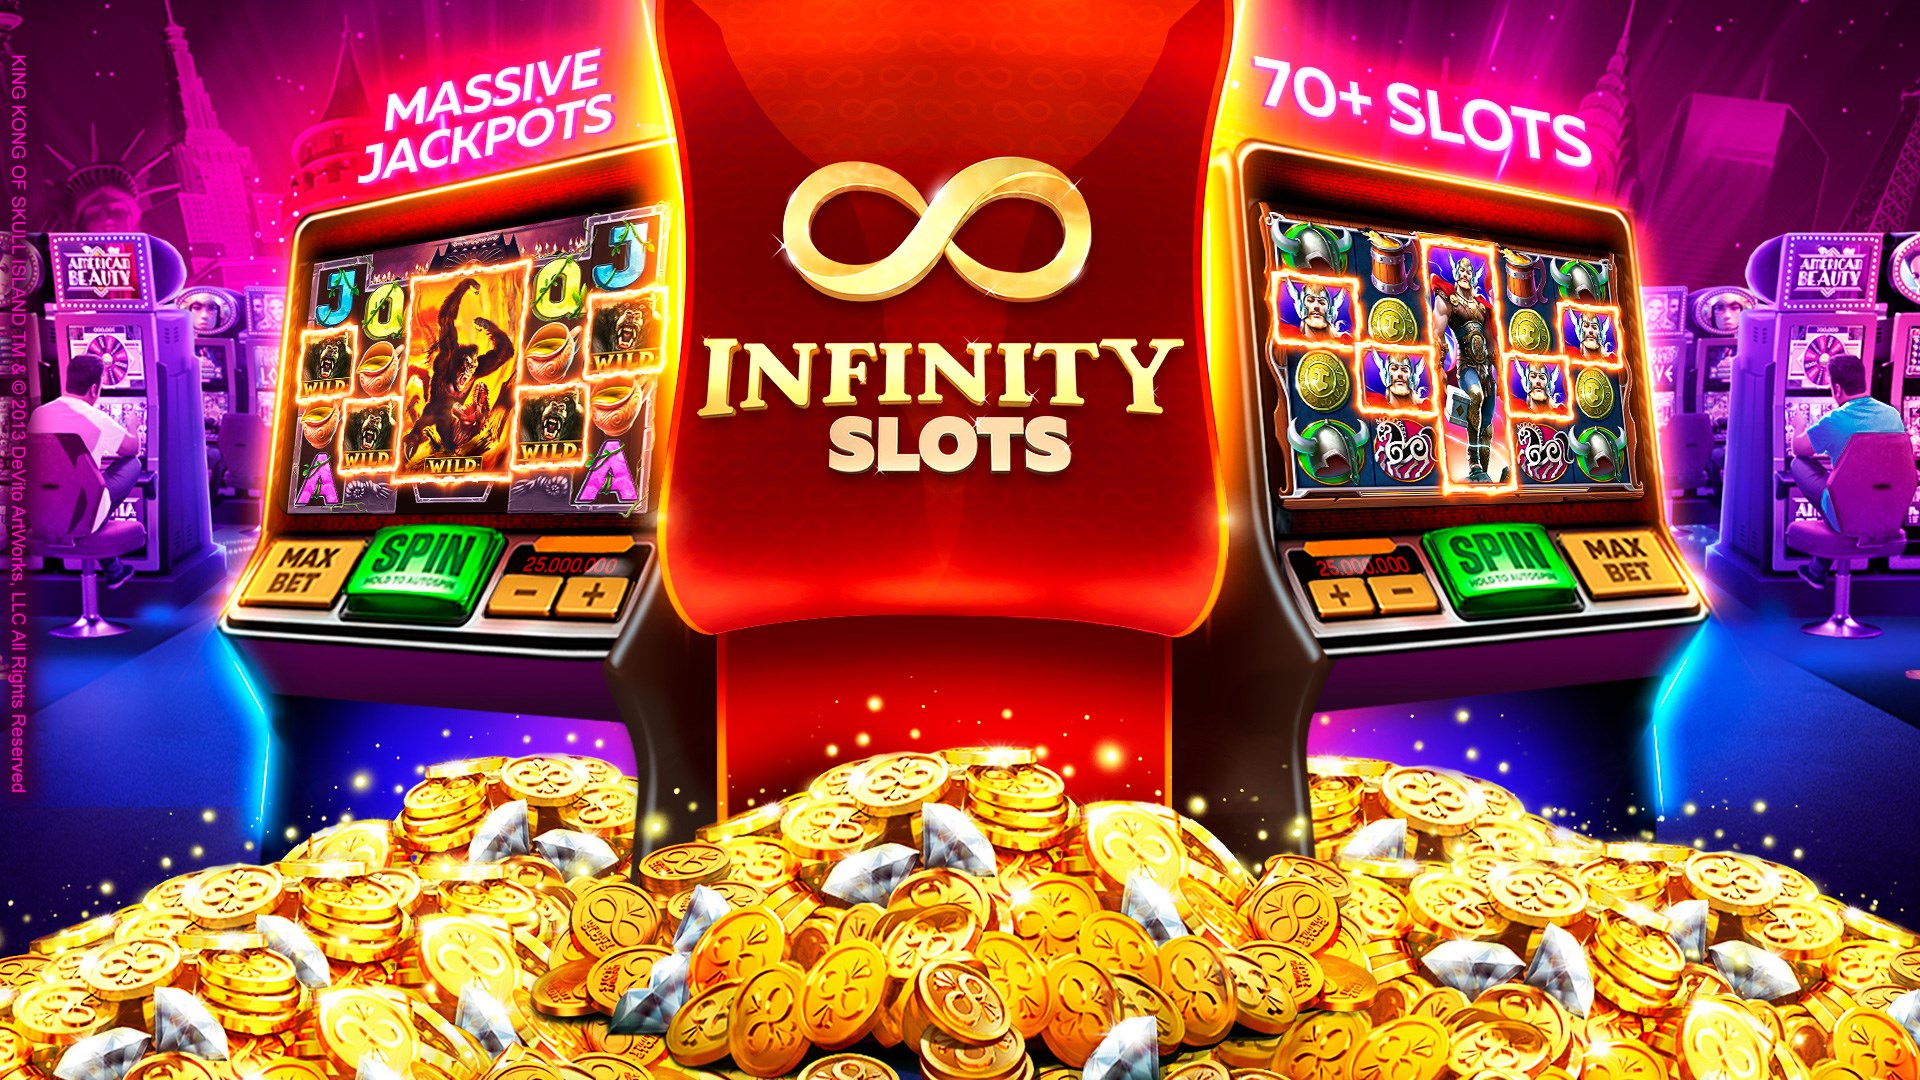 Infinity Offline Slot Machines - Free Spins & Coins